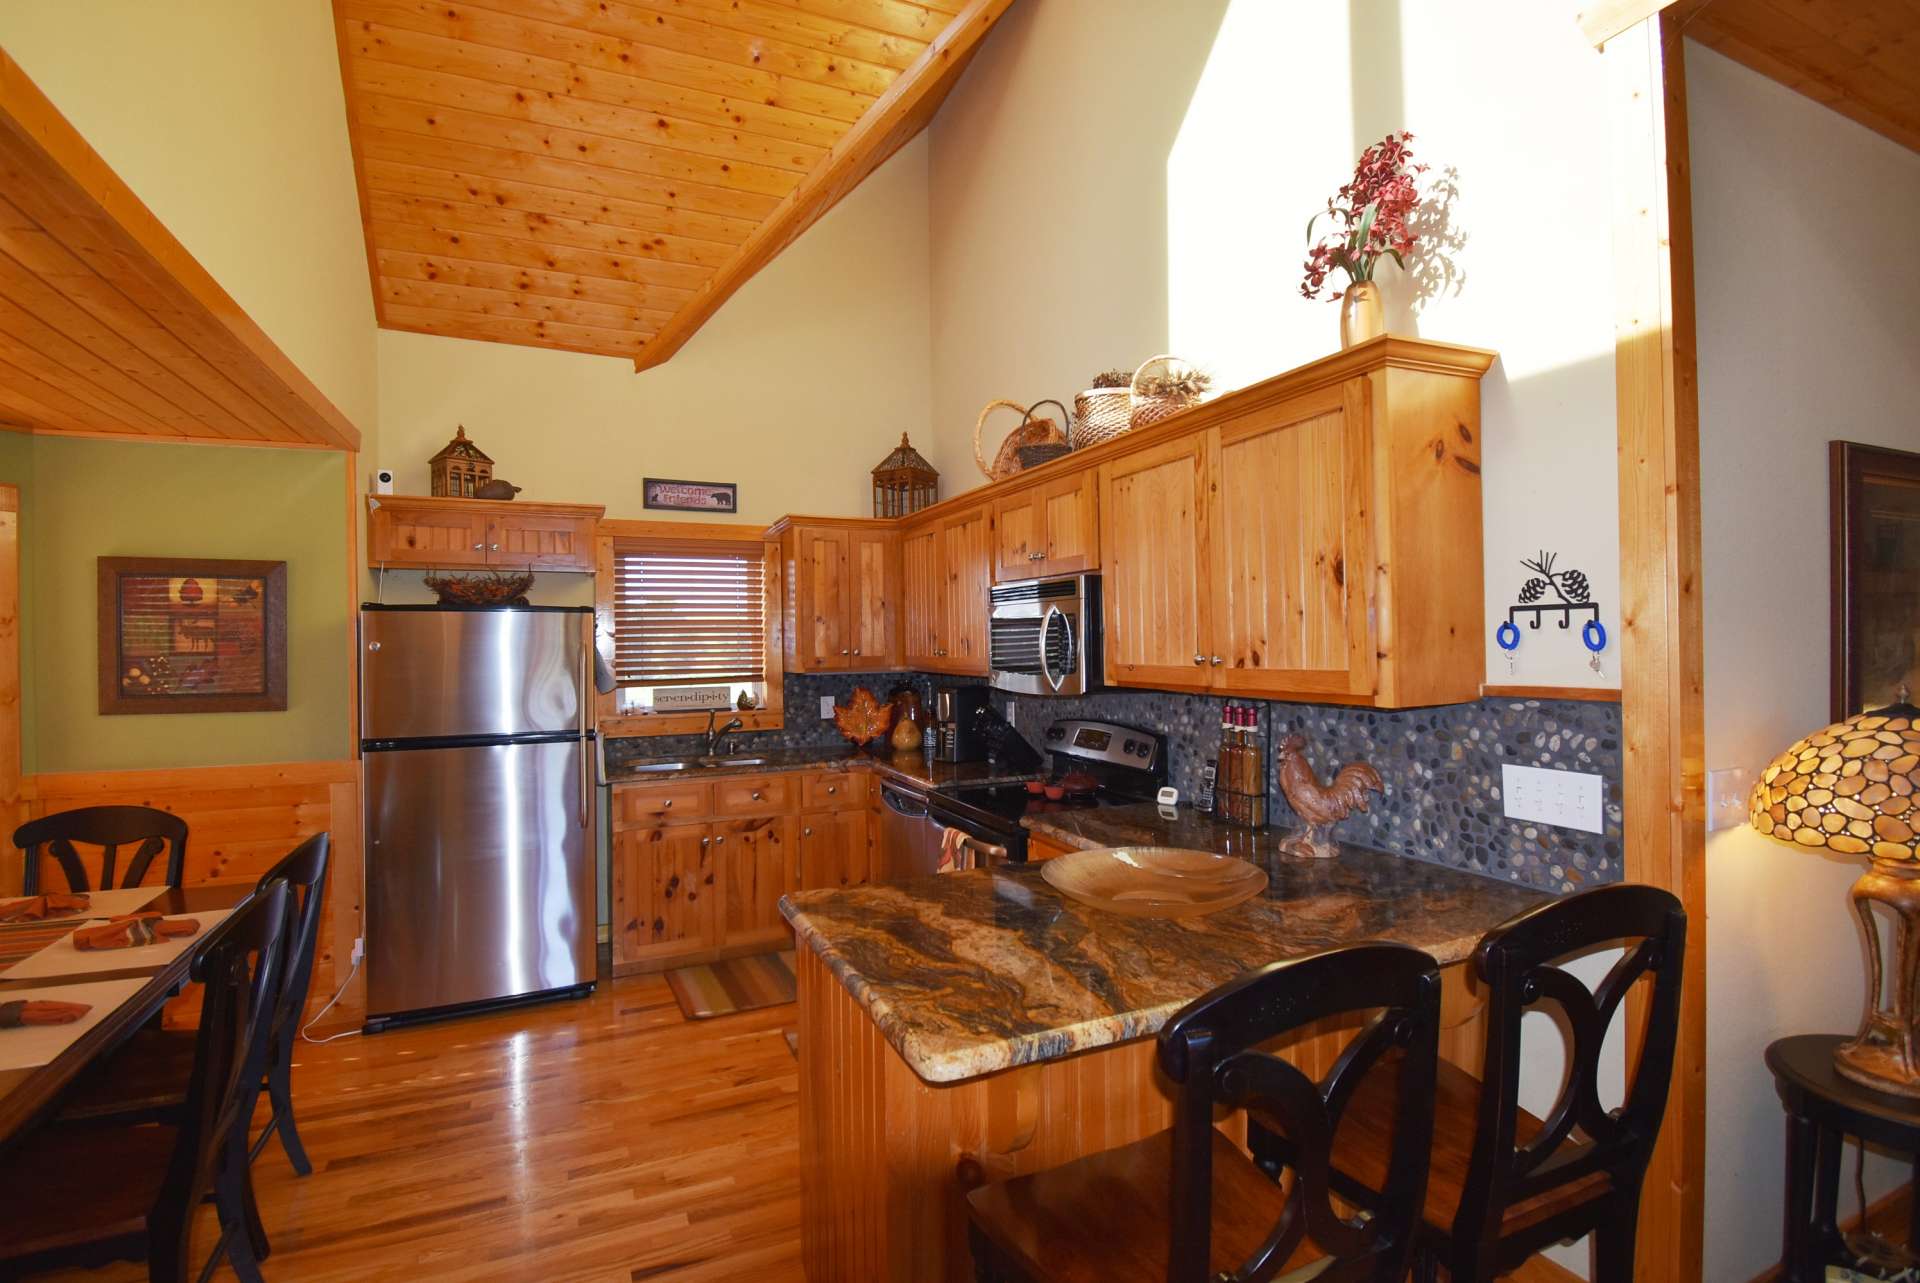 The kitchen is sure to please any chef with its stainless appliances, custom cabinetry with granite counter tops, and plenty of work and storage space including a bar with seating.